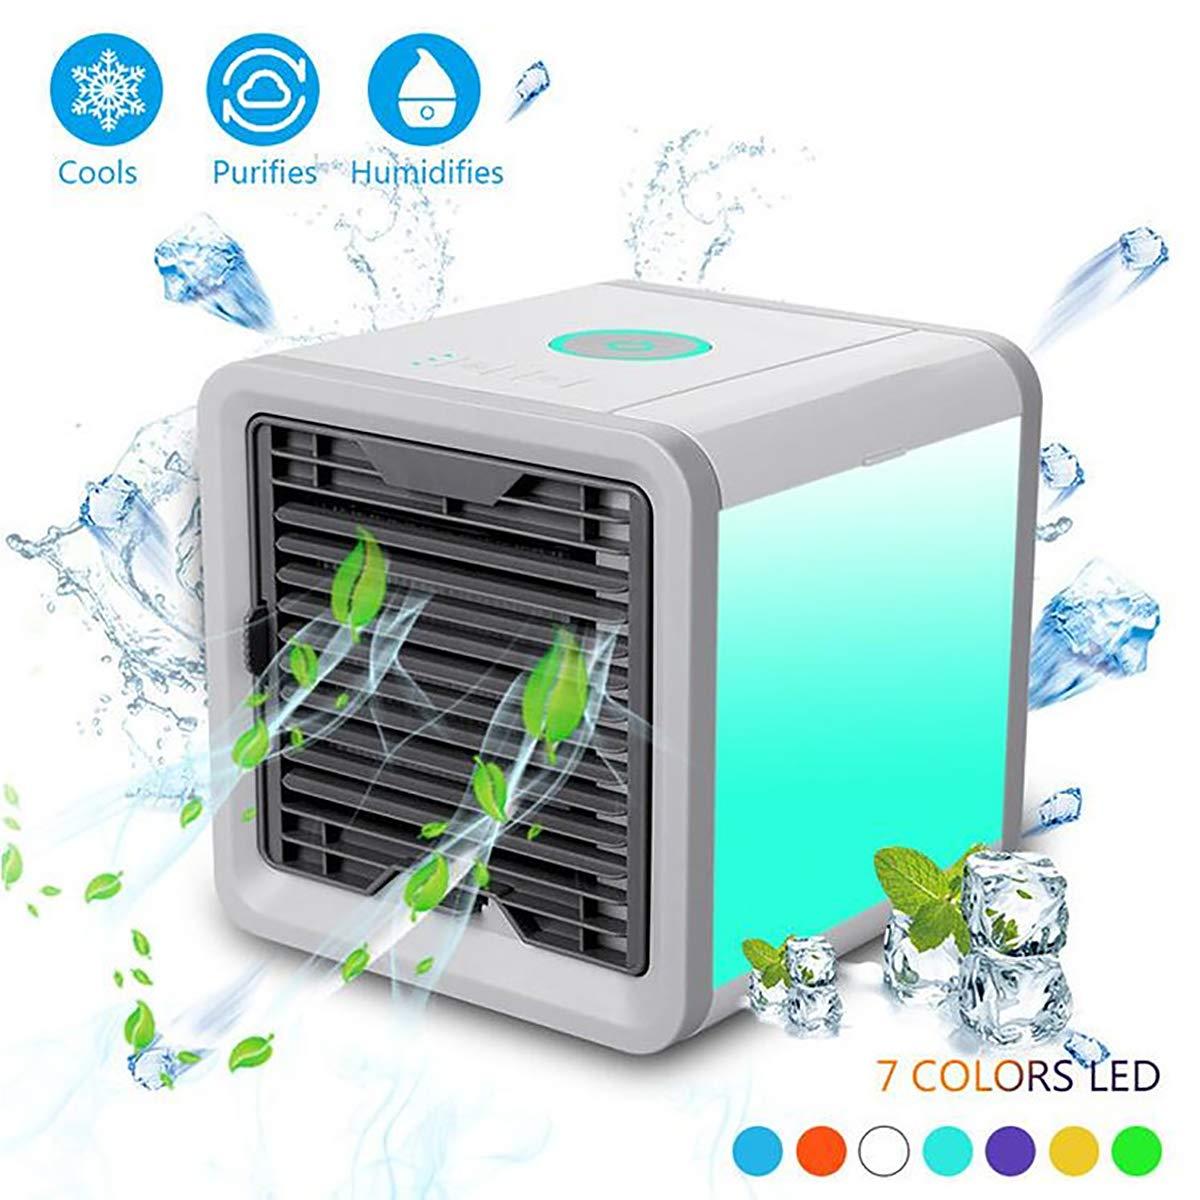 personal air cooler online